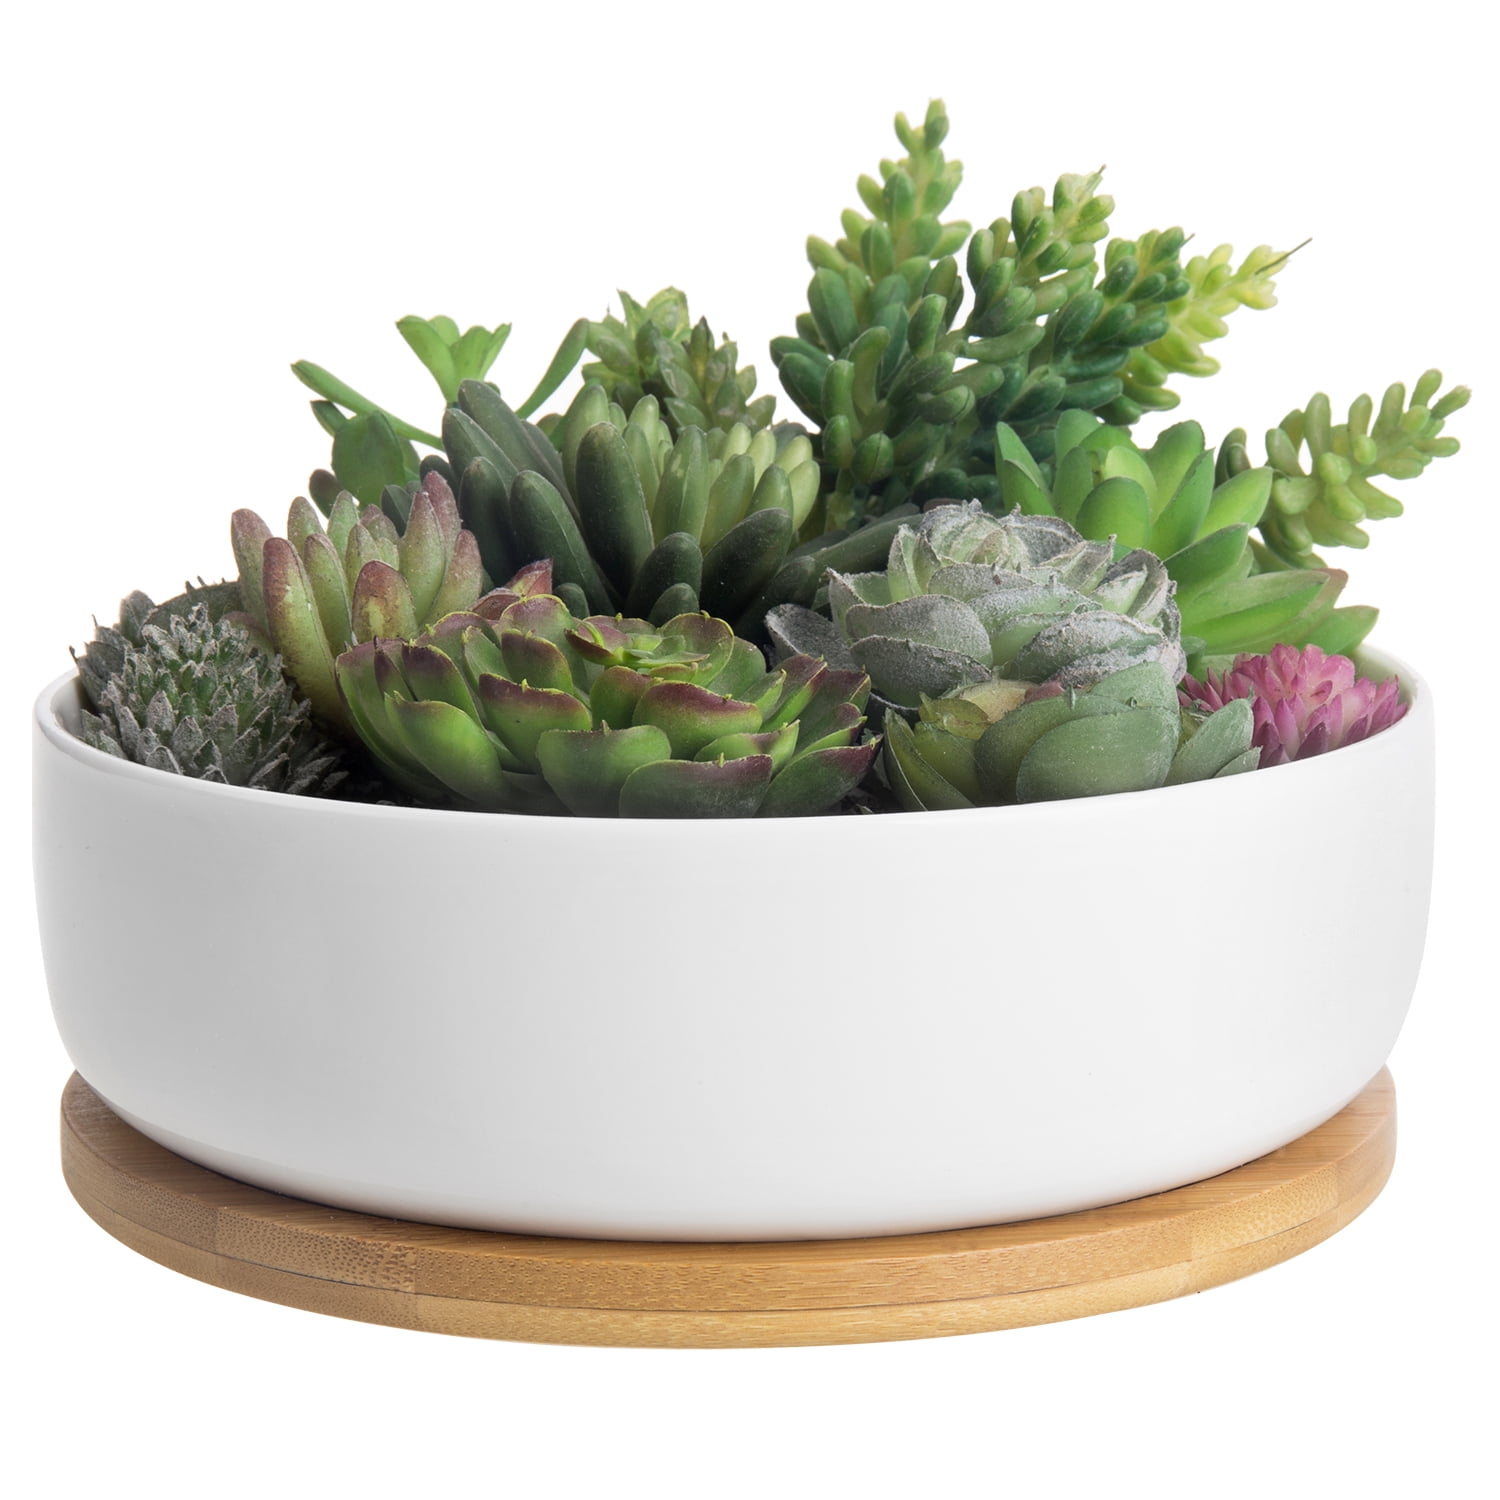 MyGift 21 Inch White Ceramic Round Planter Pot with Bamboo Tray ...